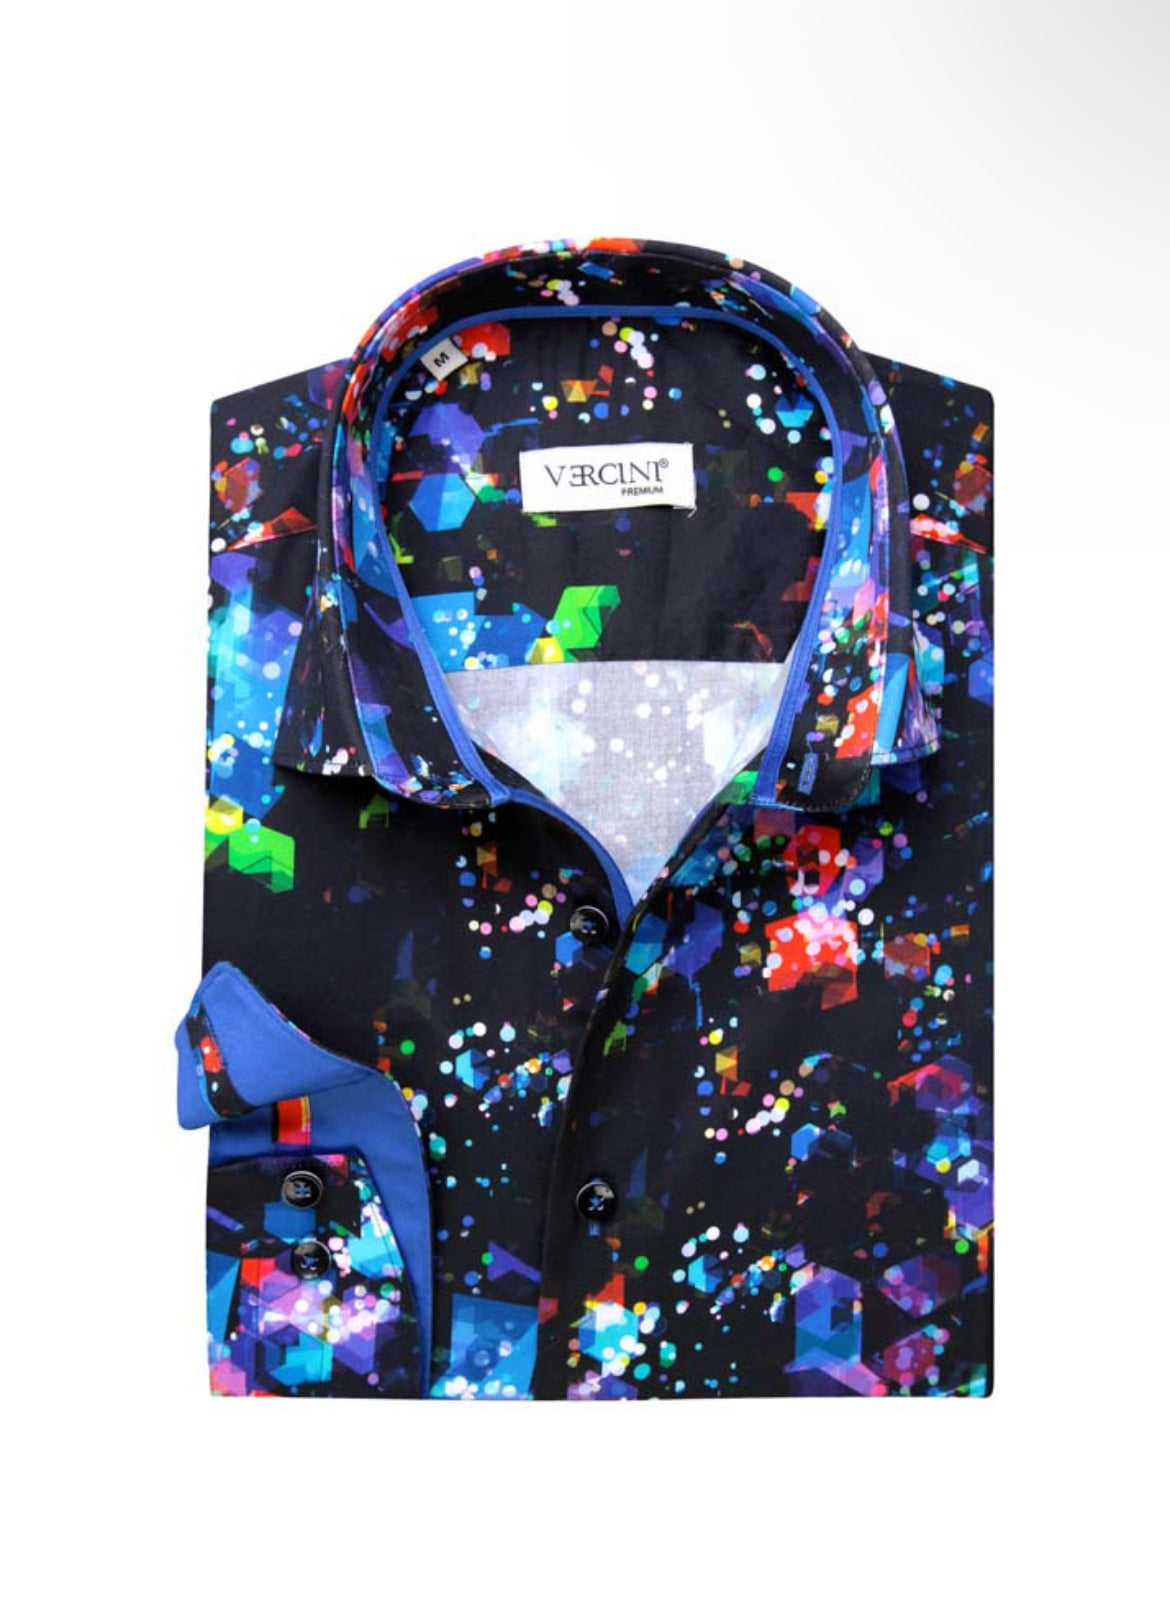 Multicolor Mola shirt CASUAL SHIRT Buy One Get One Free Vercini